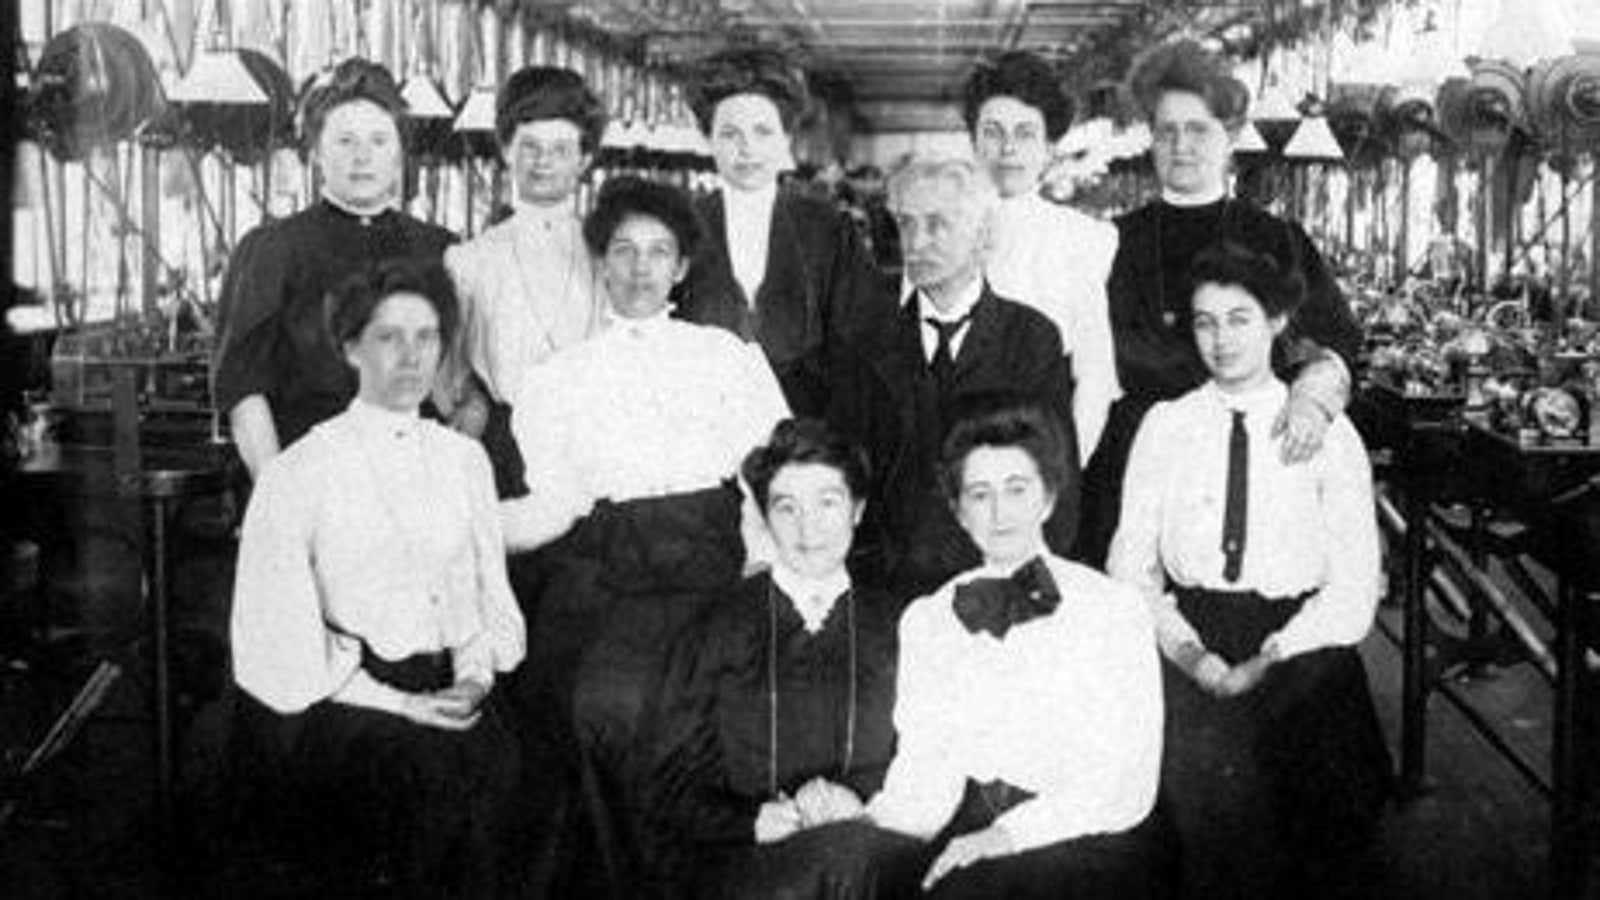 Early Waltham women workers with a senior Waltham employee.